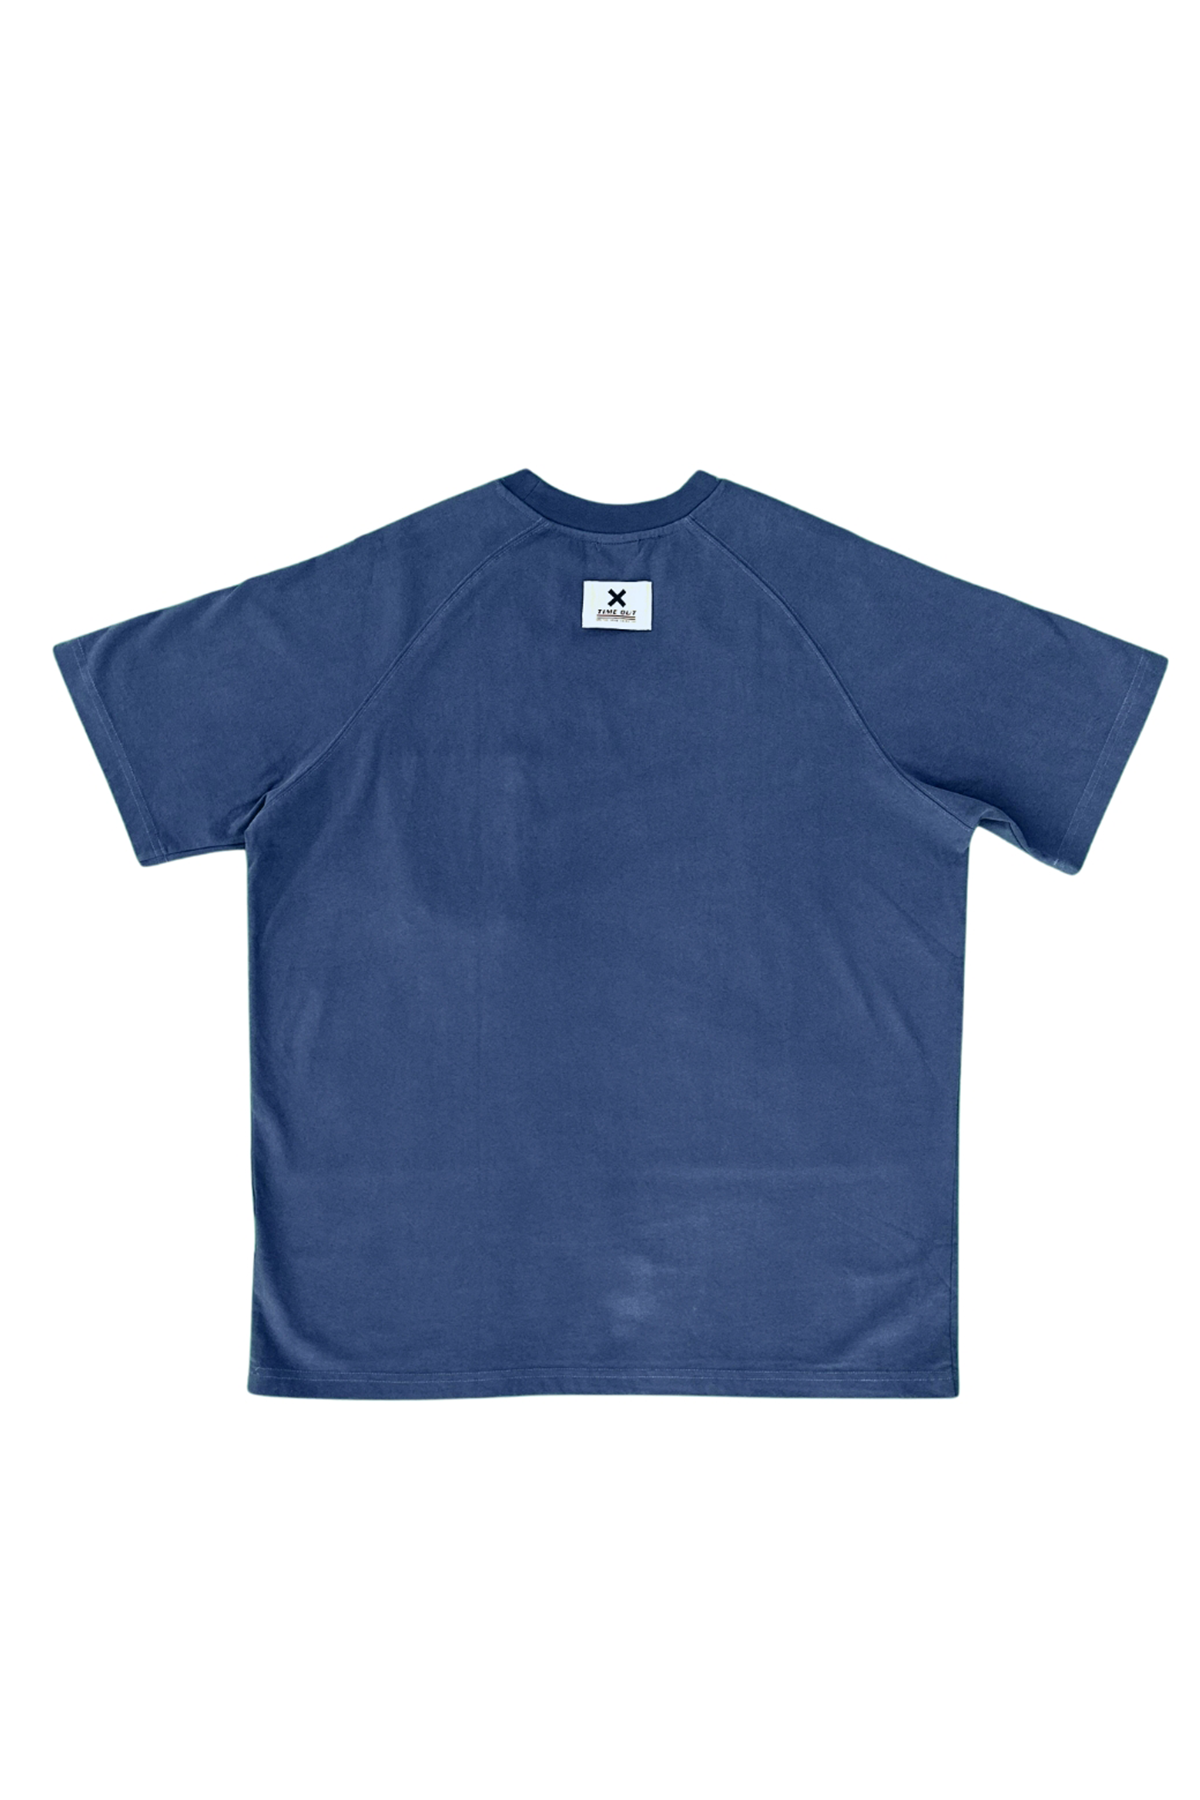 Oversized-Front-Pocket-Tee-with-Raglan-Sleeves-Unisex-Navy-Blue-back